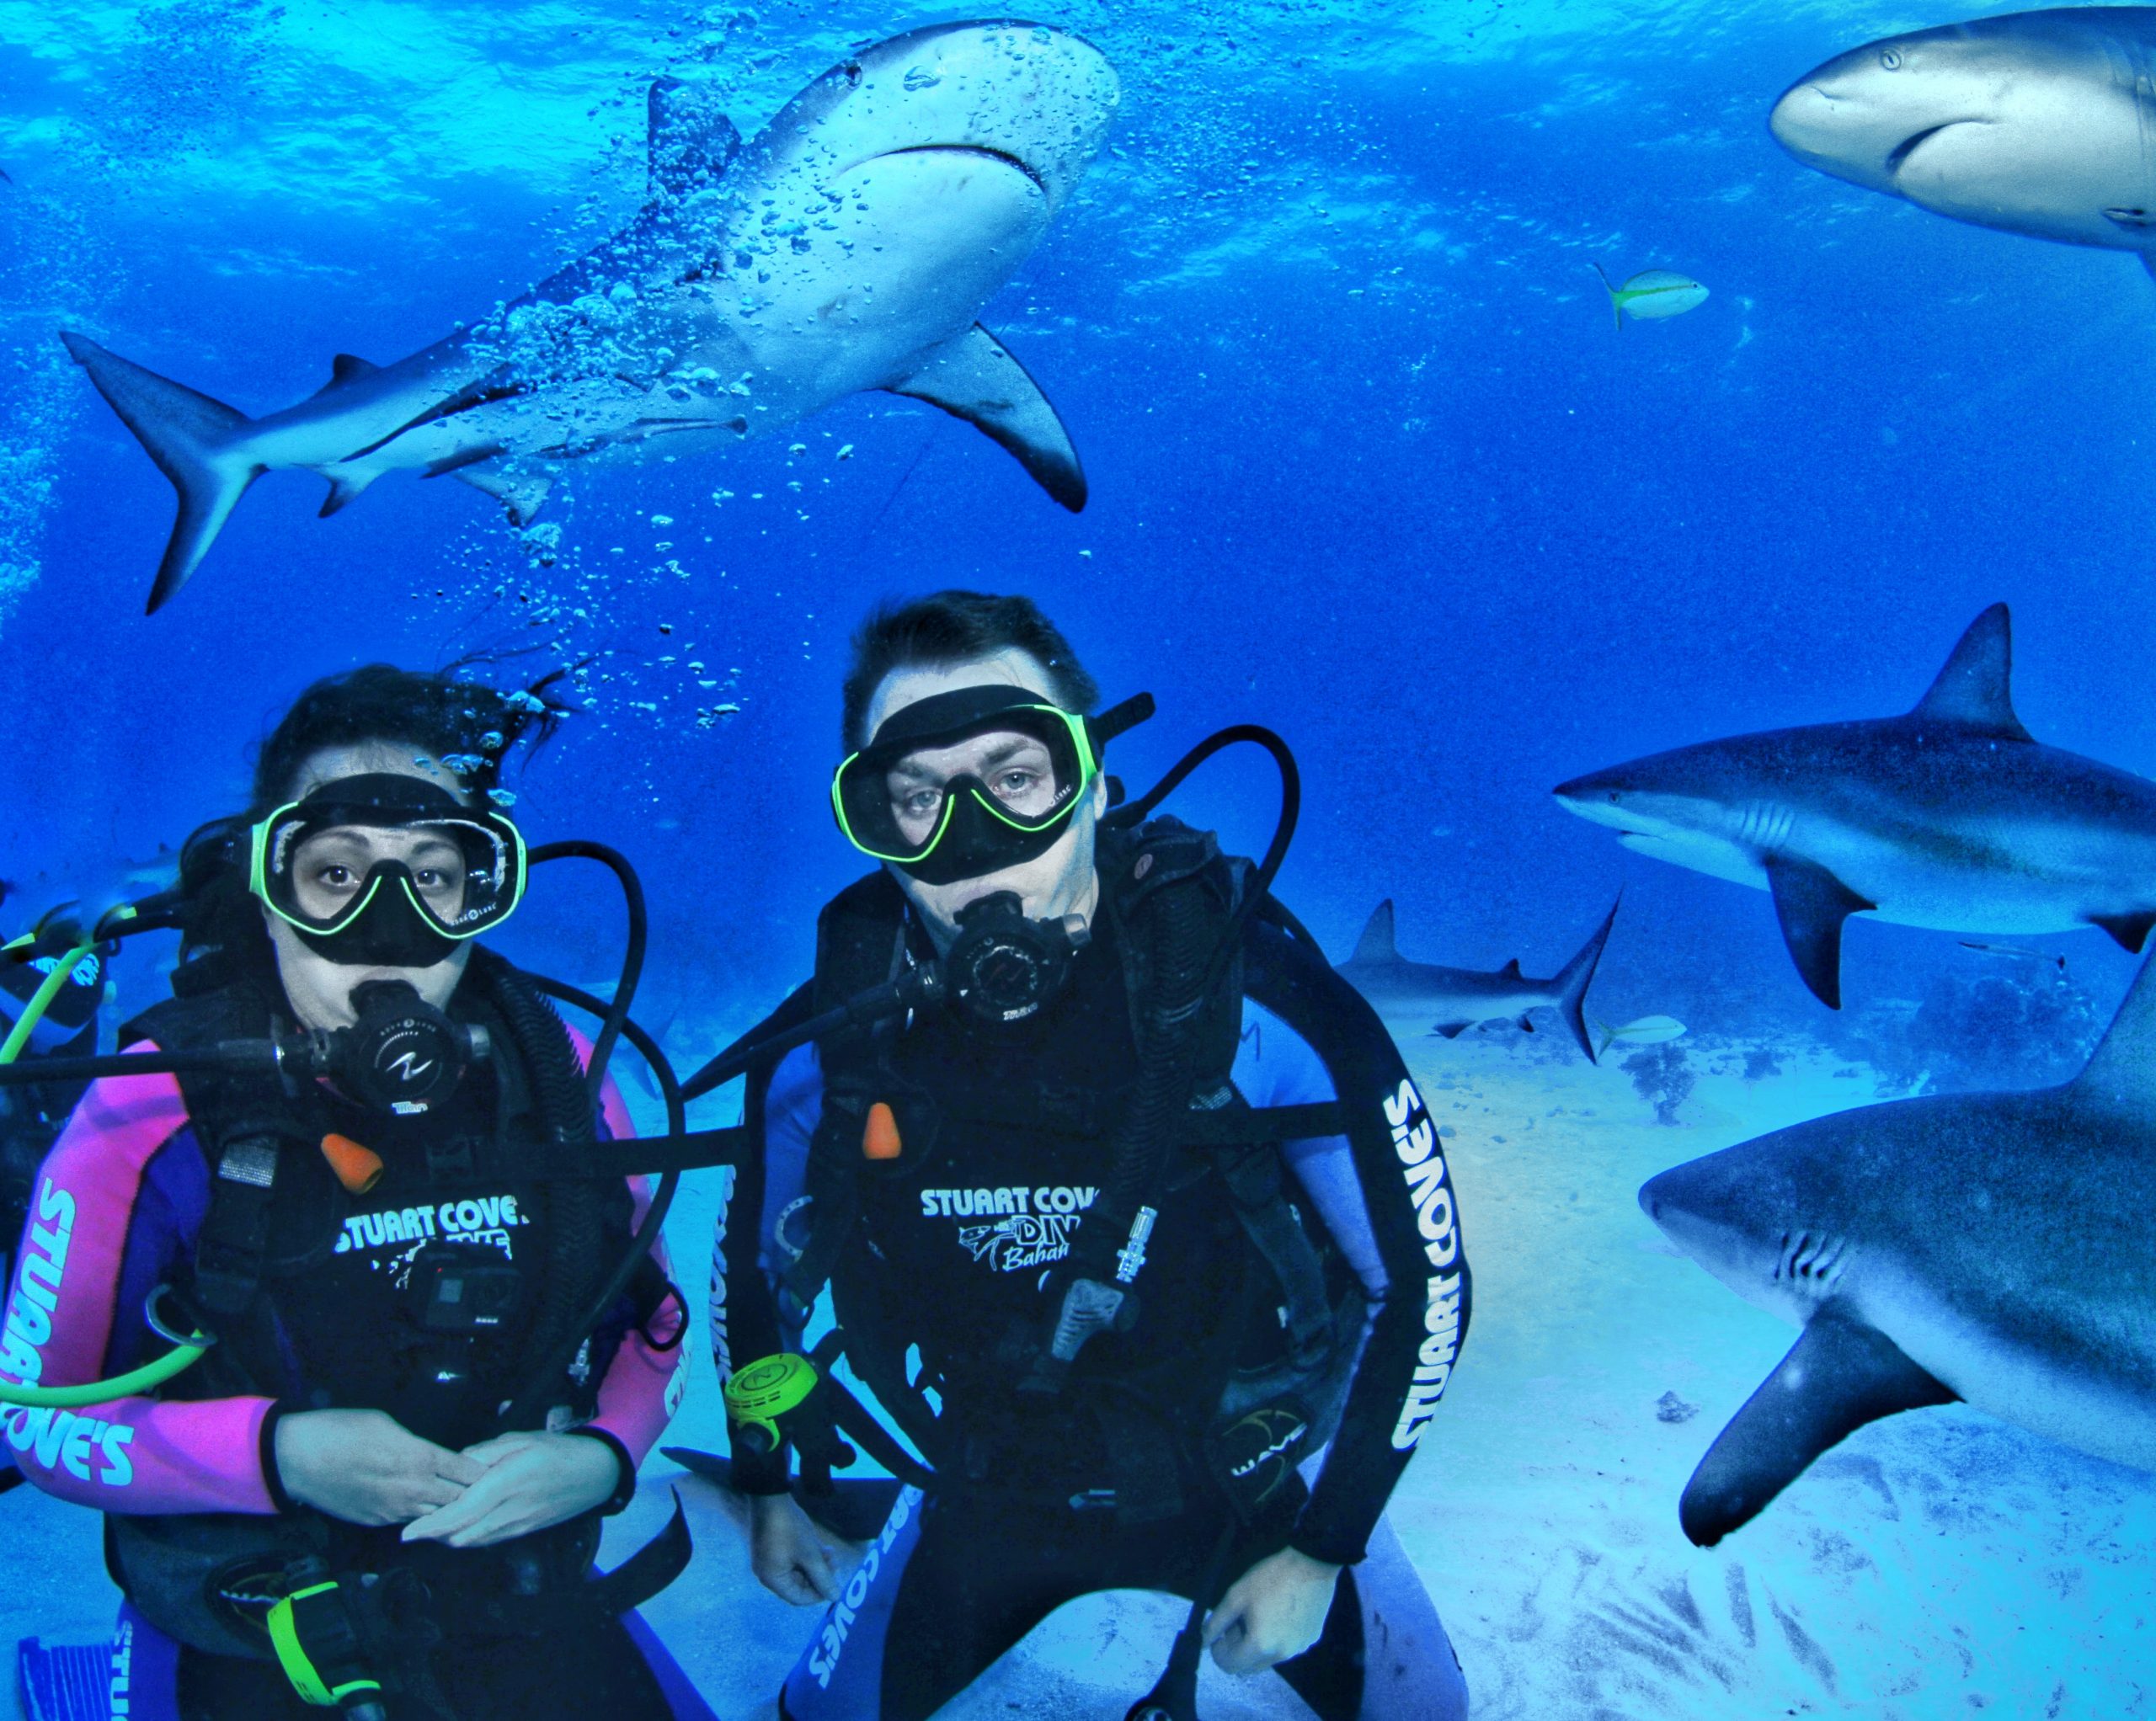 Couple scuba diving with sharks swimming all around